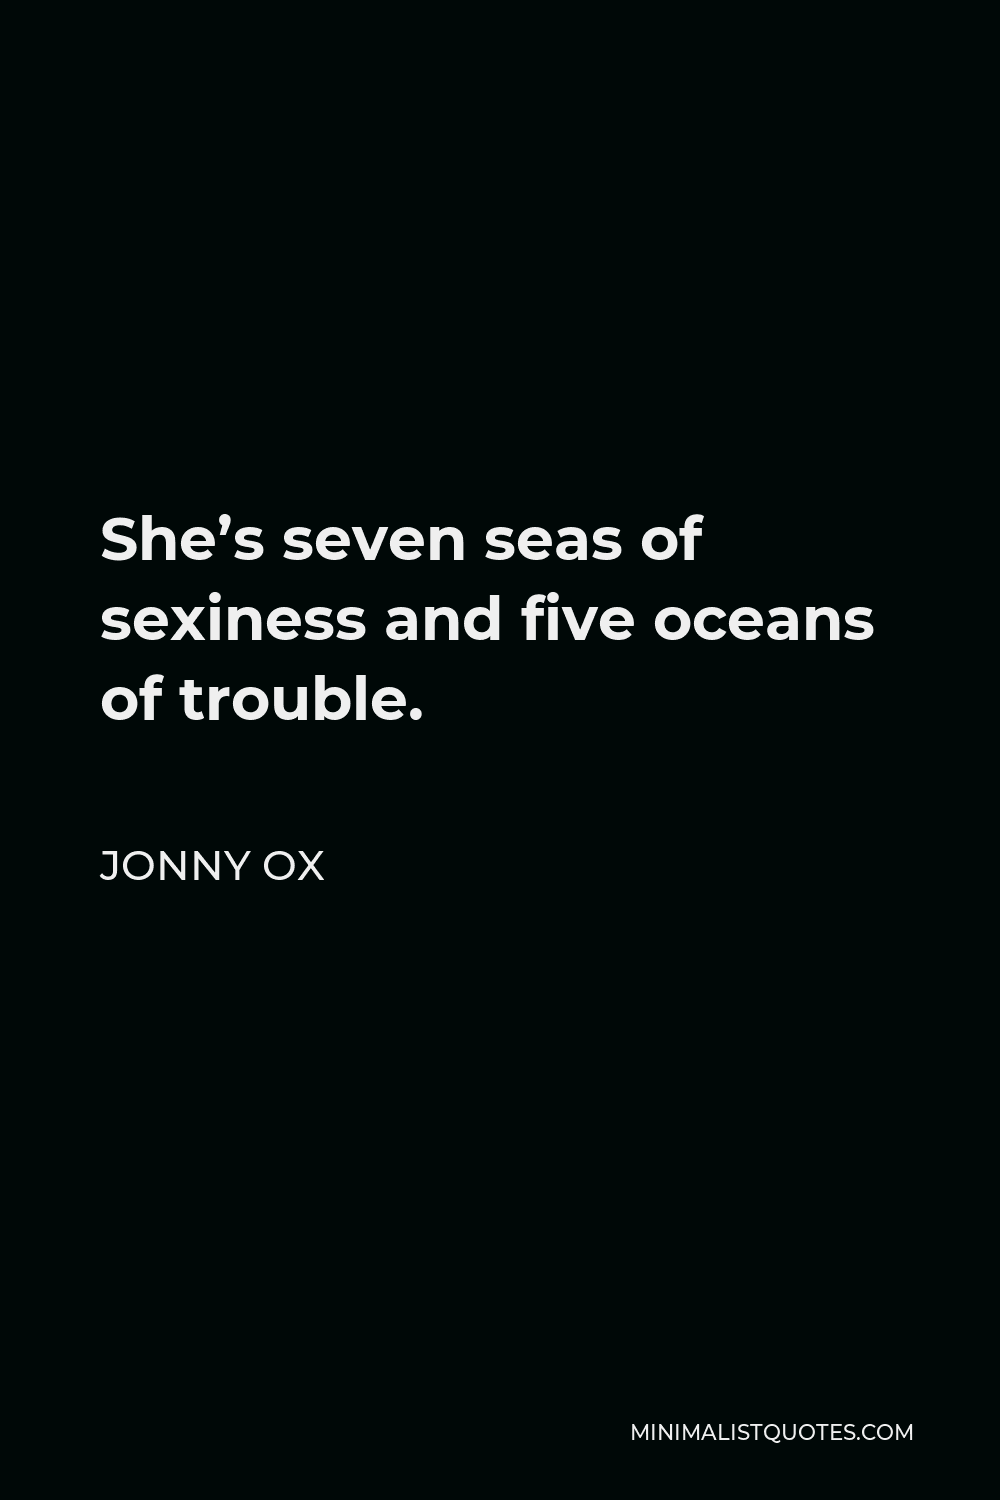 Jonny Ox Quote - She’s seven seas of sexiness and five oceans of trouble.